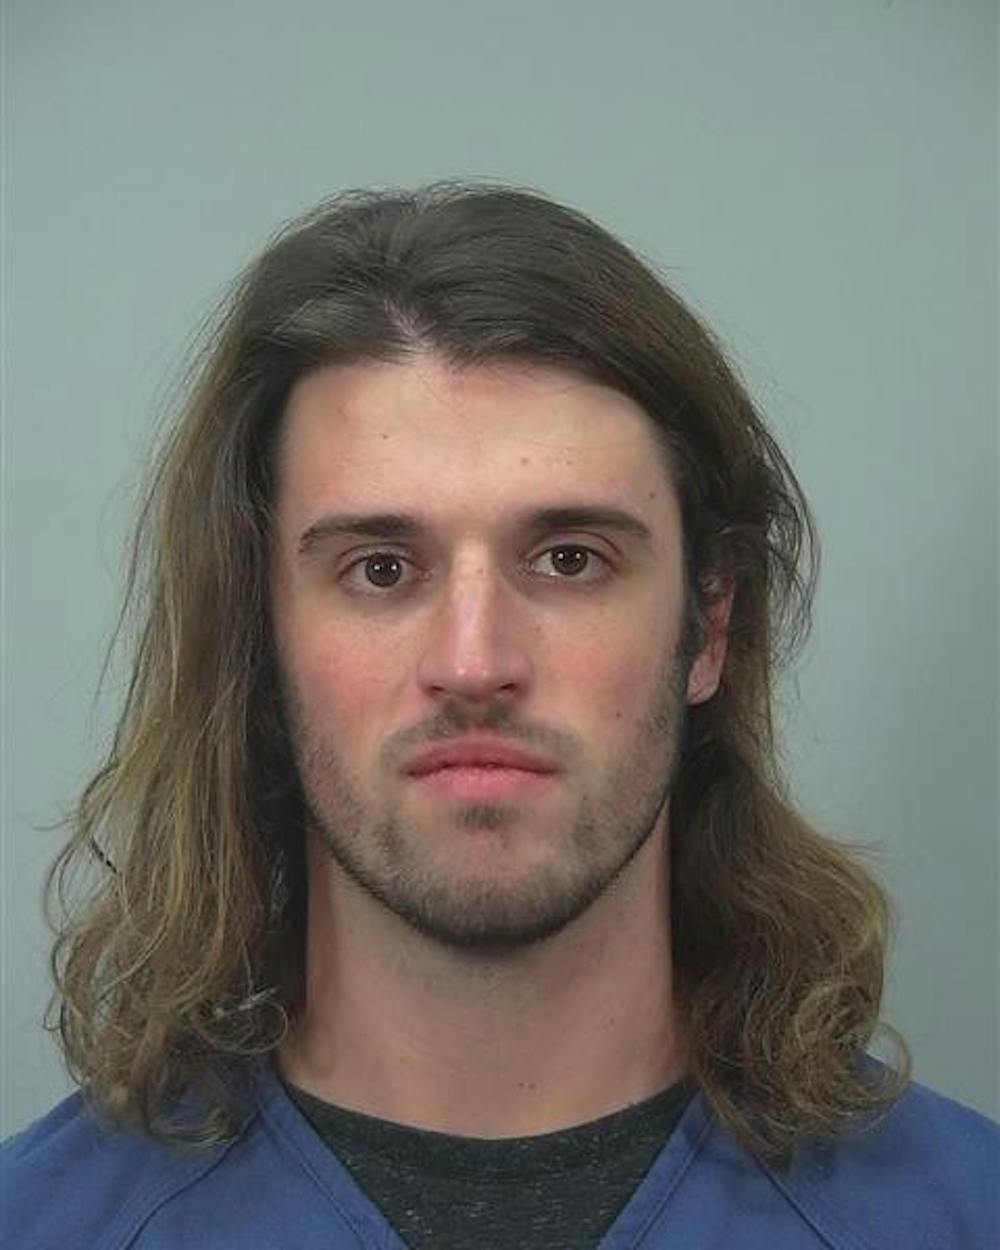 Three UW-Madison students have accused Alec R. Cook of sexual assault. Madison Police Department is recommending he receive additional charges following the third report.